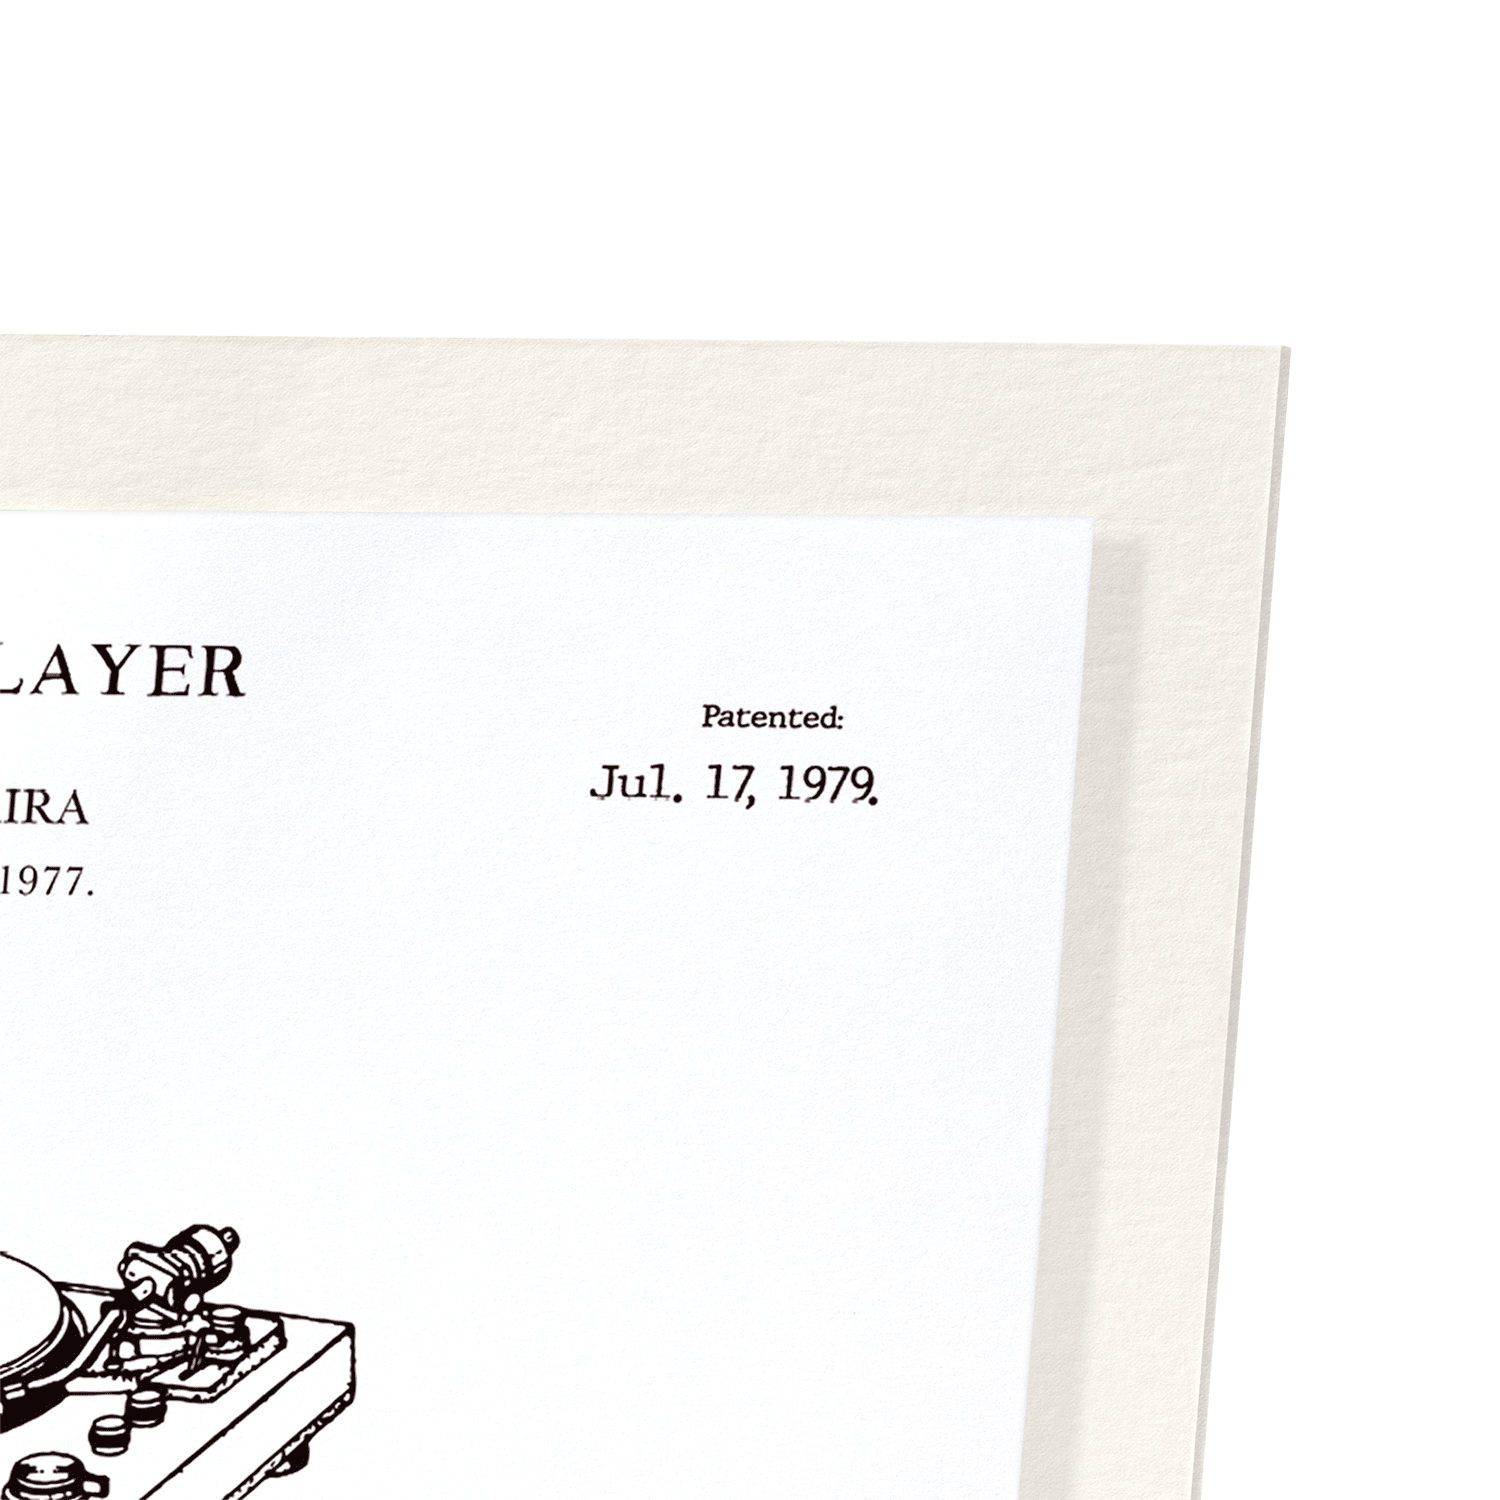 PATENT OF RECORD PLAYER (1979)